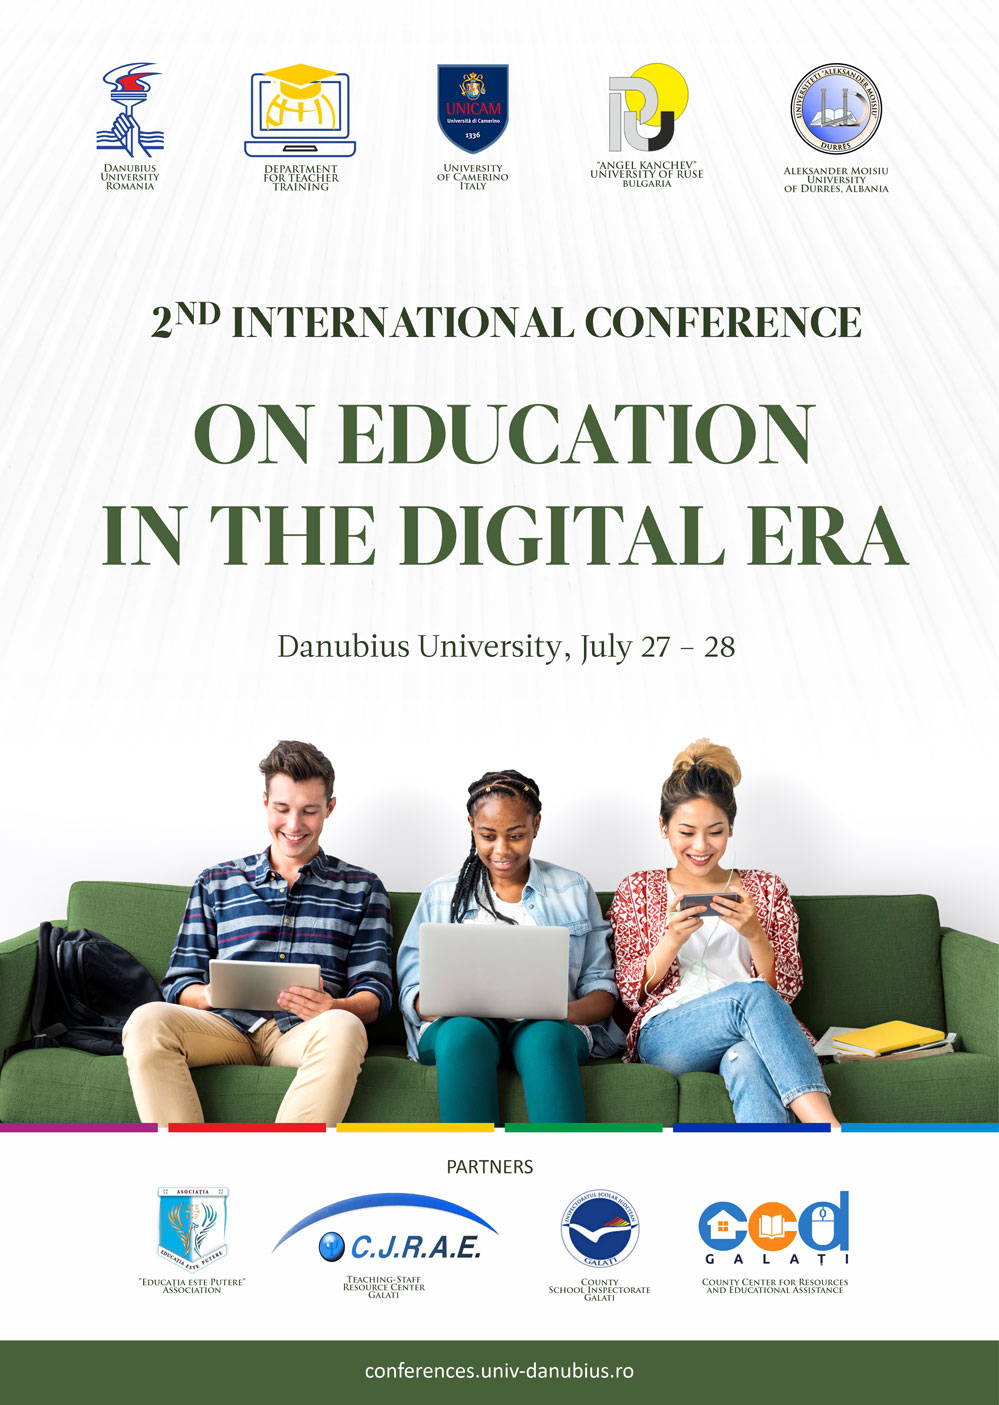 2nd International Conference on Education in the Digital Era